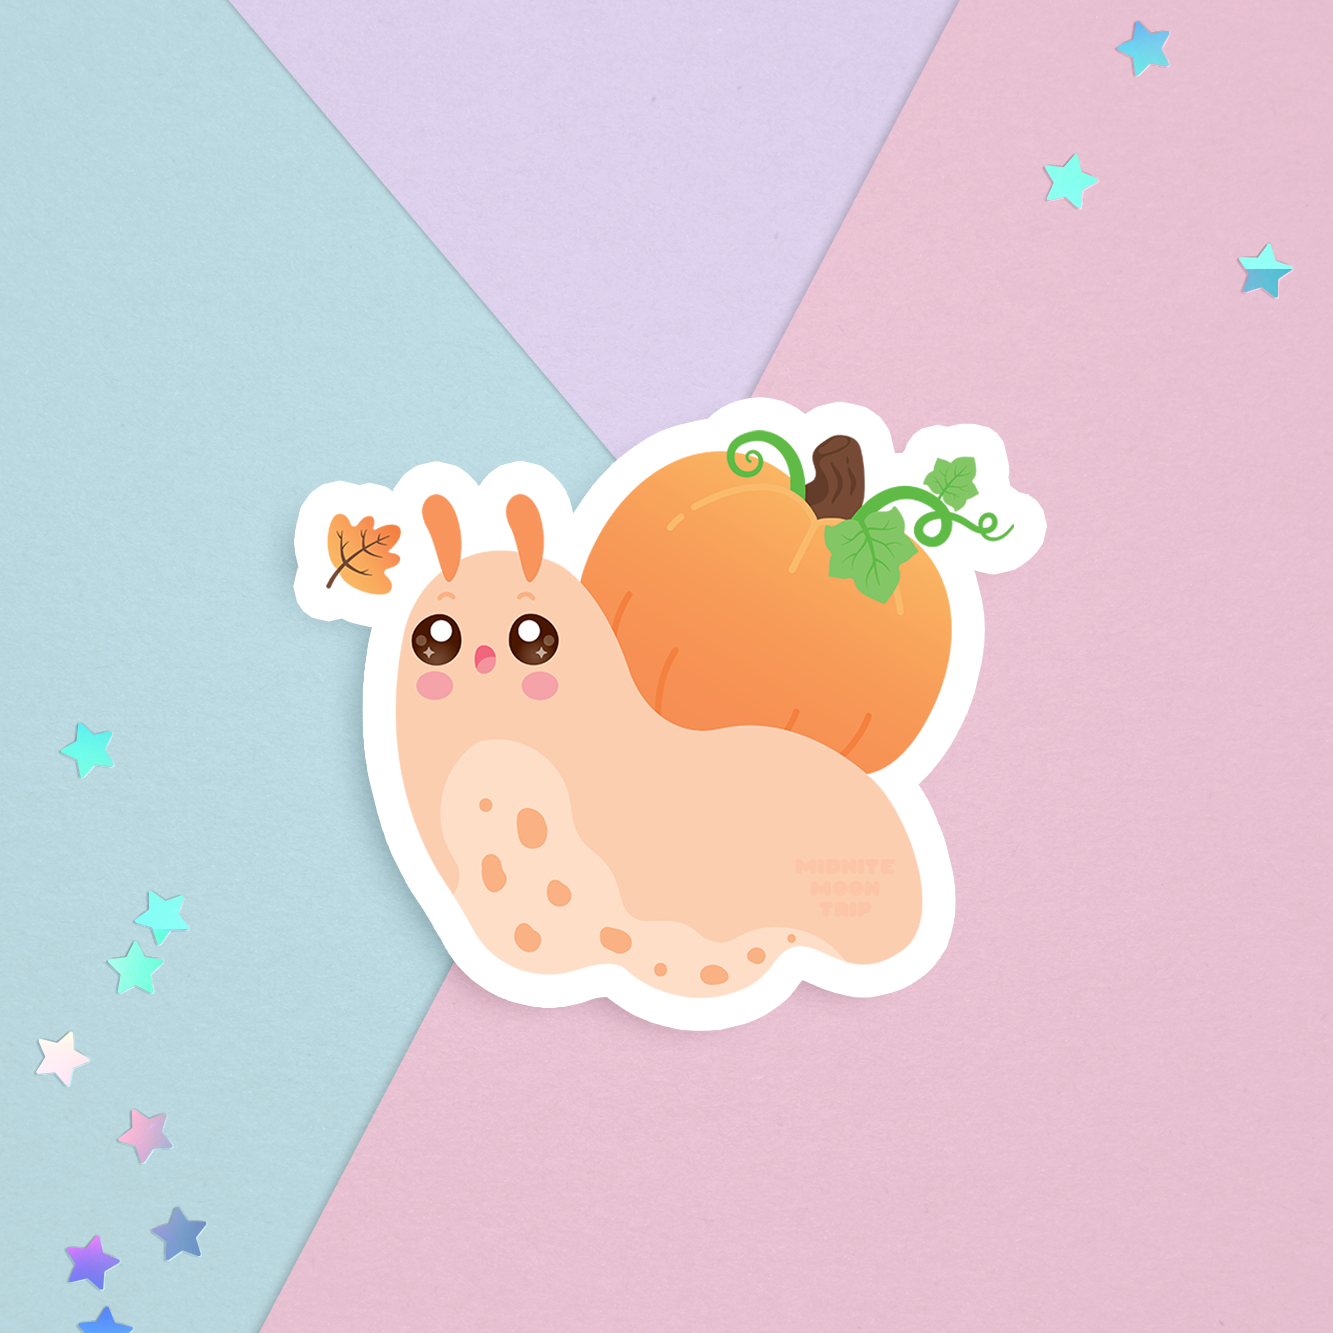 sticker of a kawaii cute orange snail with a pumpkin shell looking at a orange and yellow autumn fall leaf